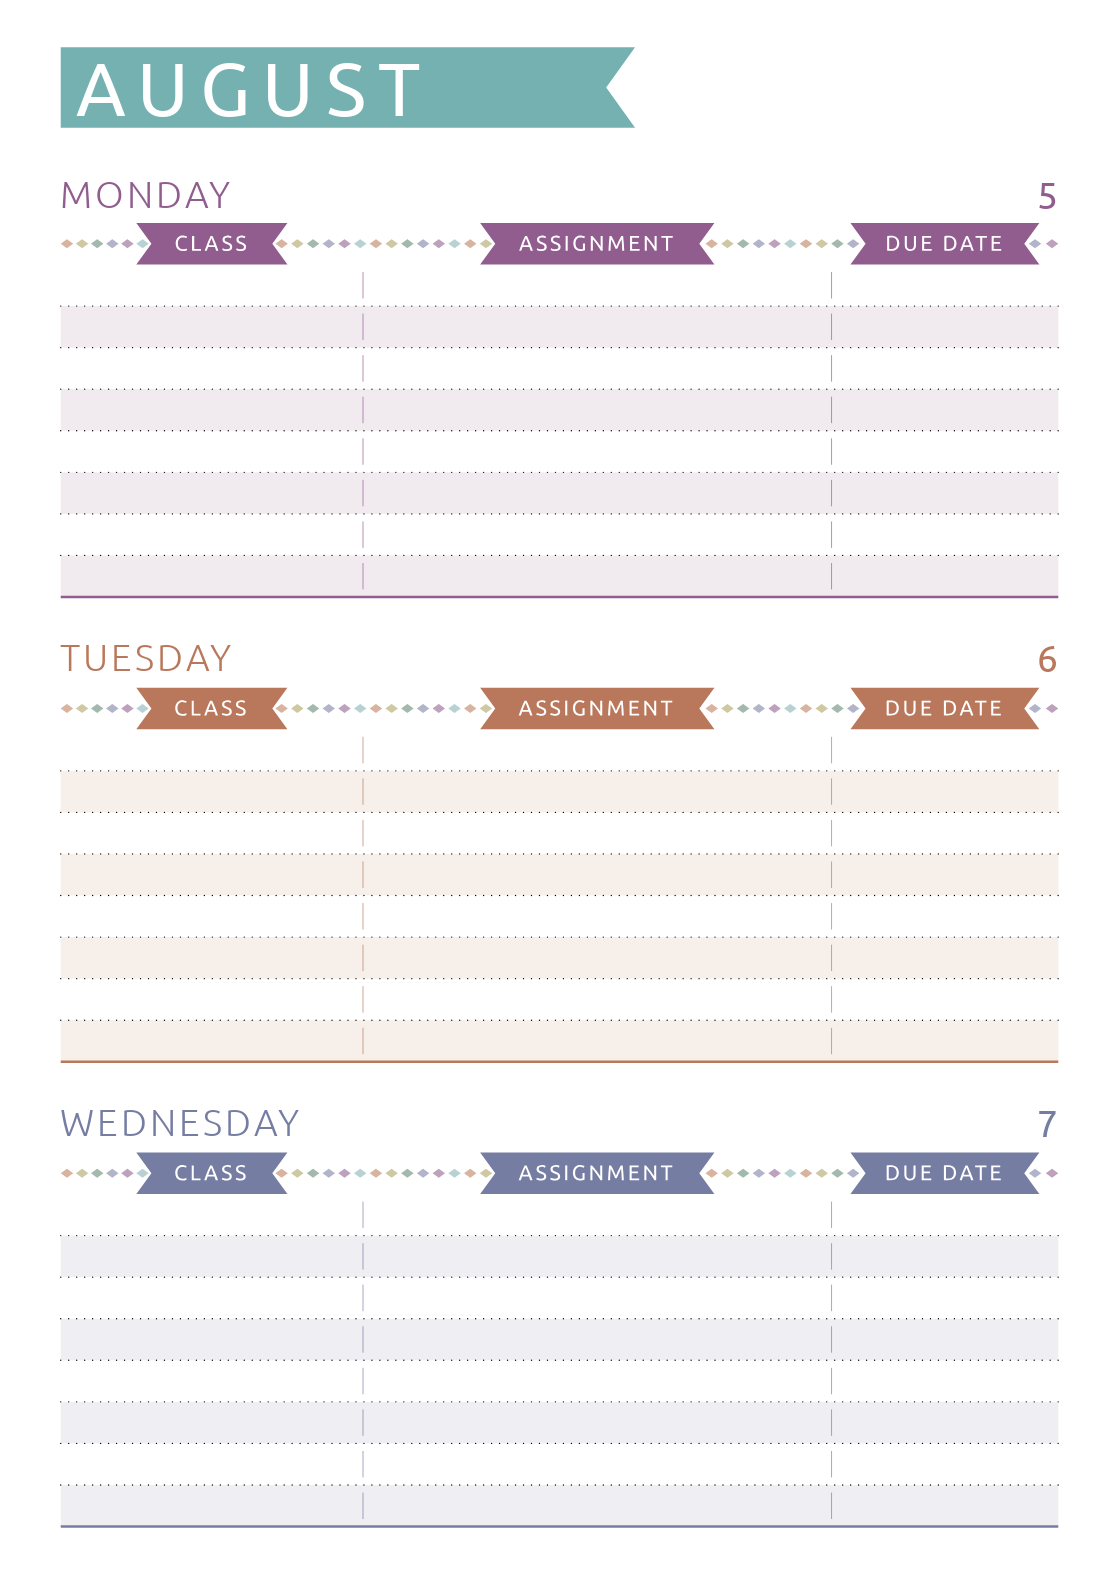 Daily College Activity Planner Timeline Free Downloadable  With Regard To College Tour Itinerary Template